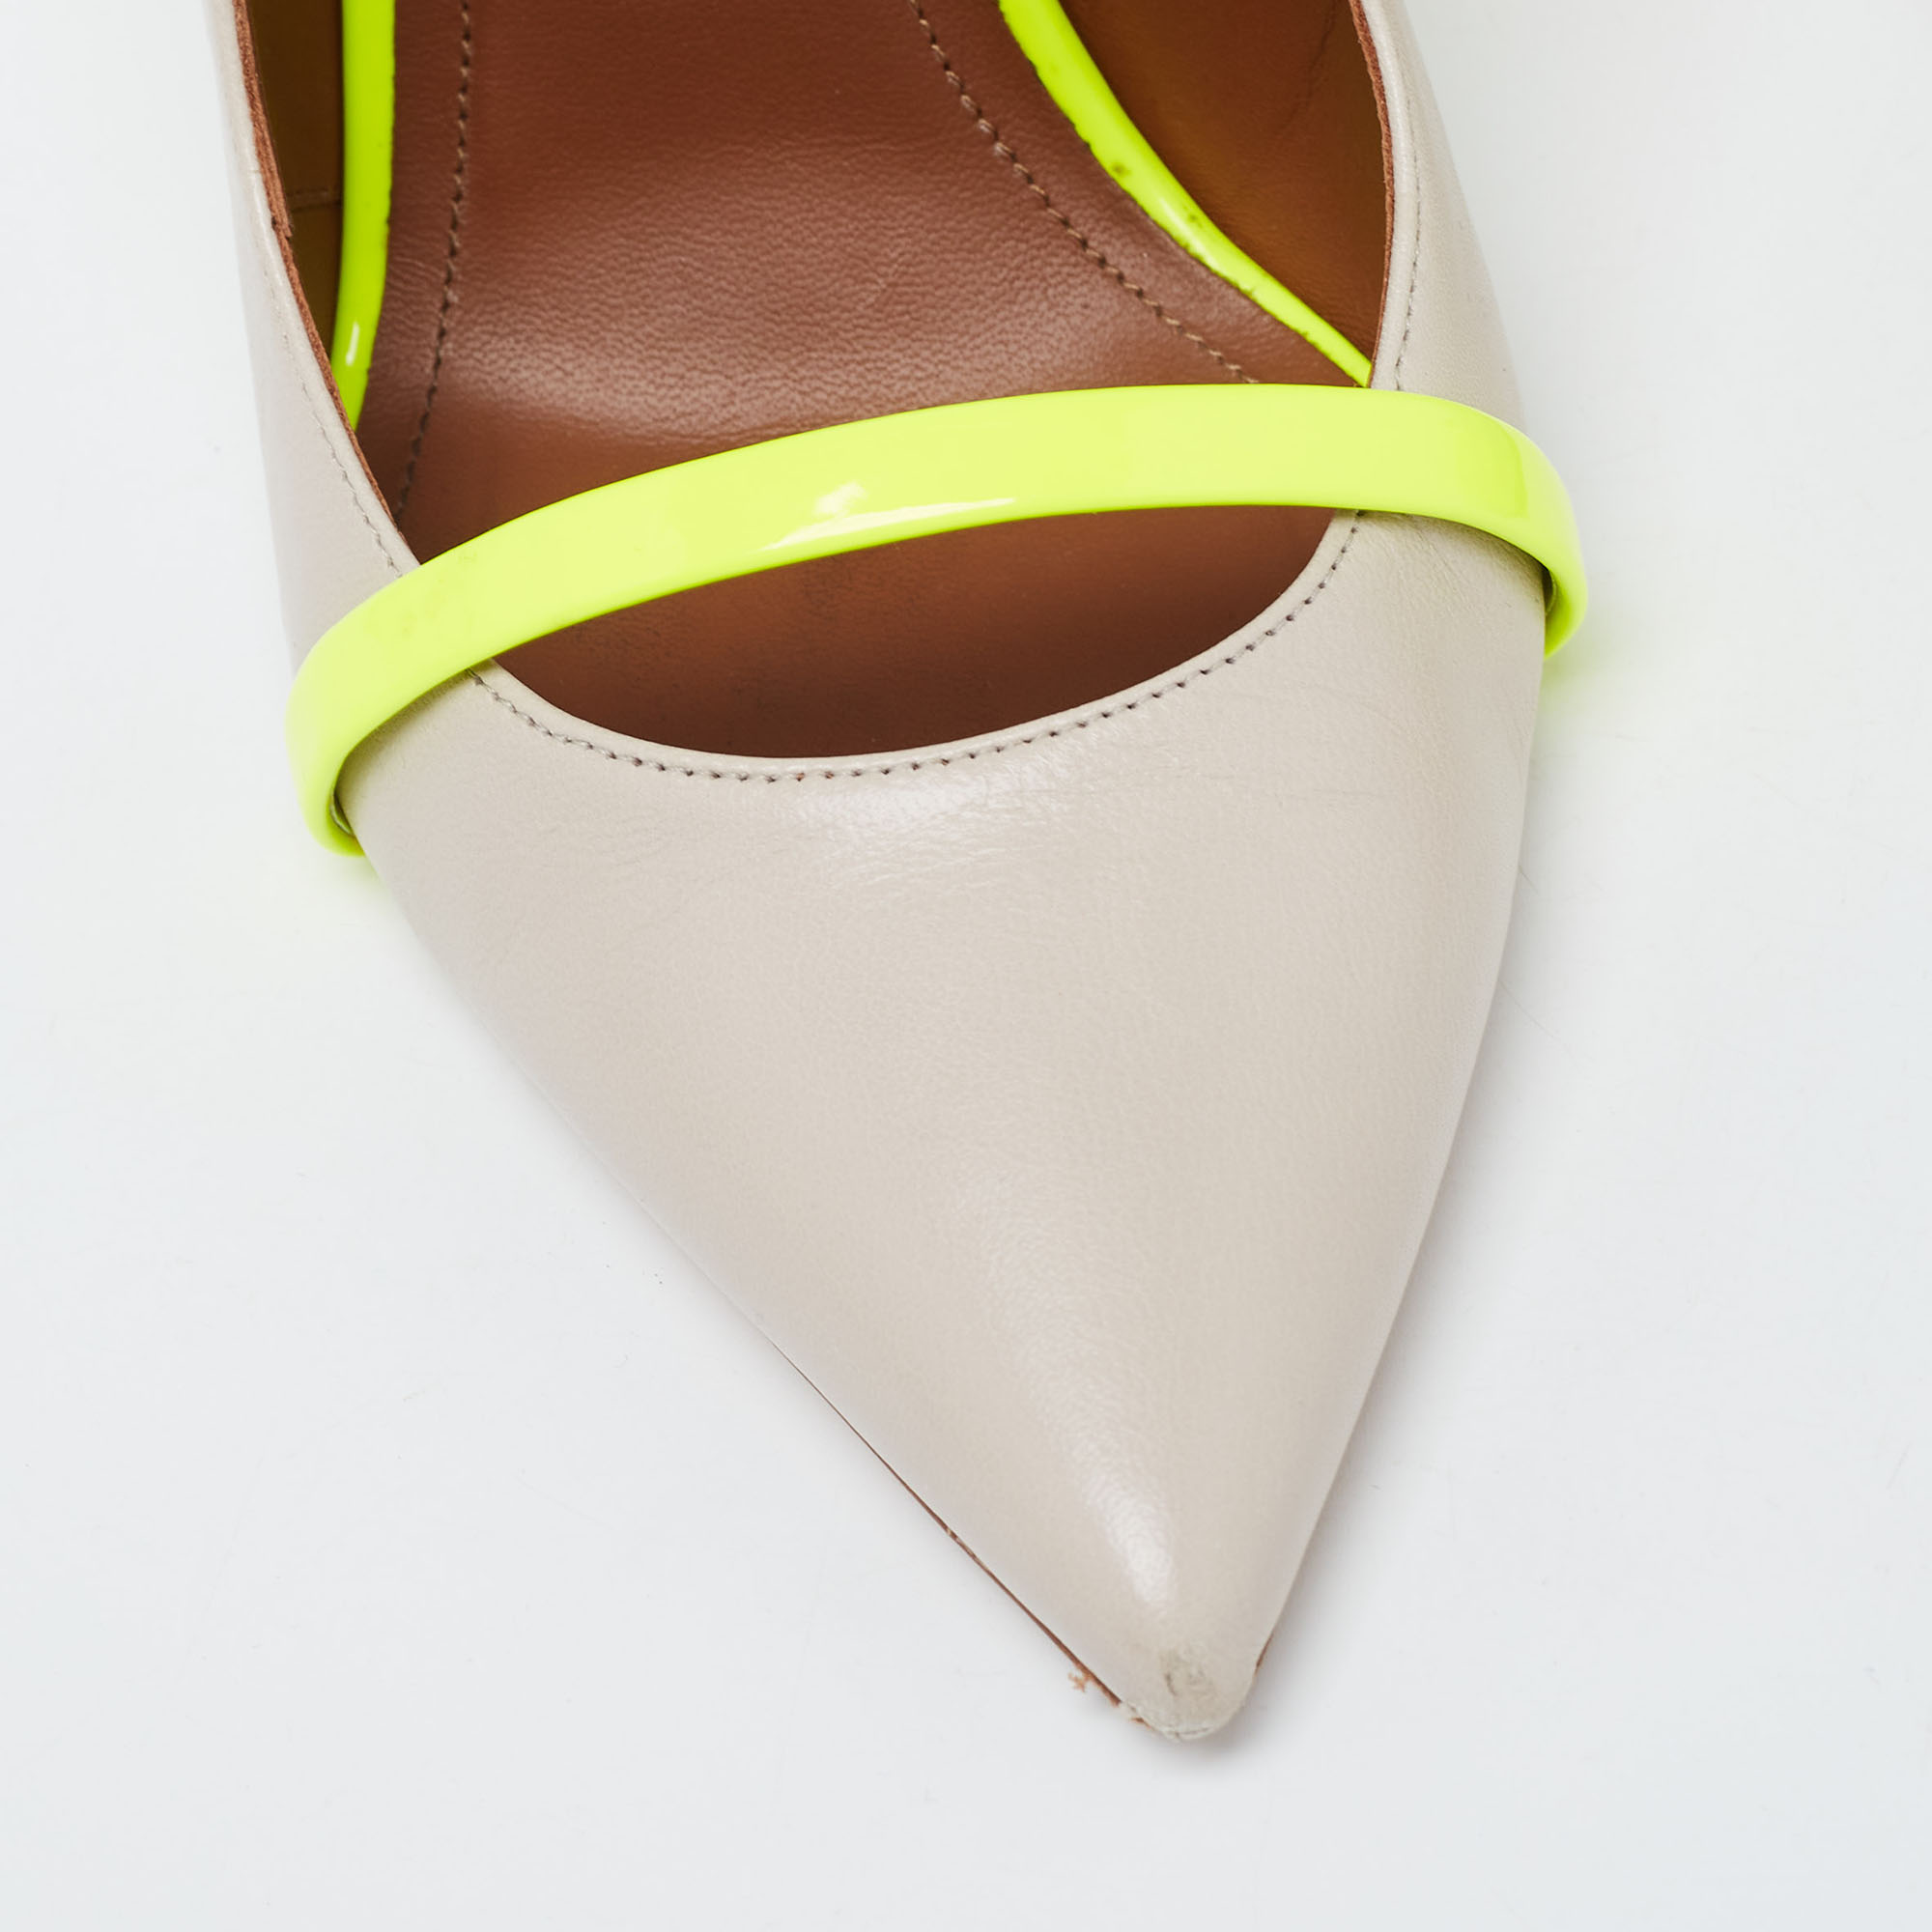 Malone Souliers Grey/Neon Green Leather And Patent Maureen Mules Size 39